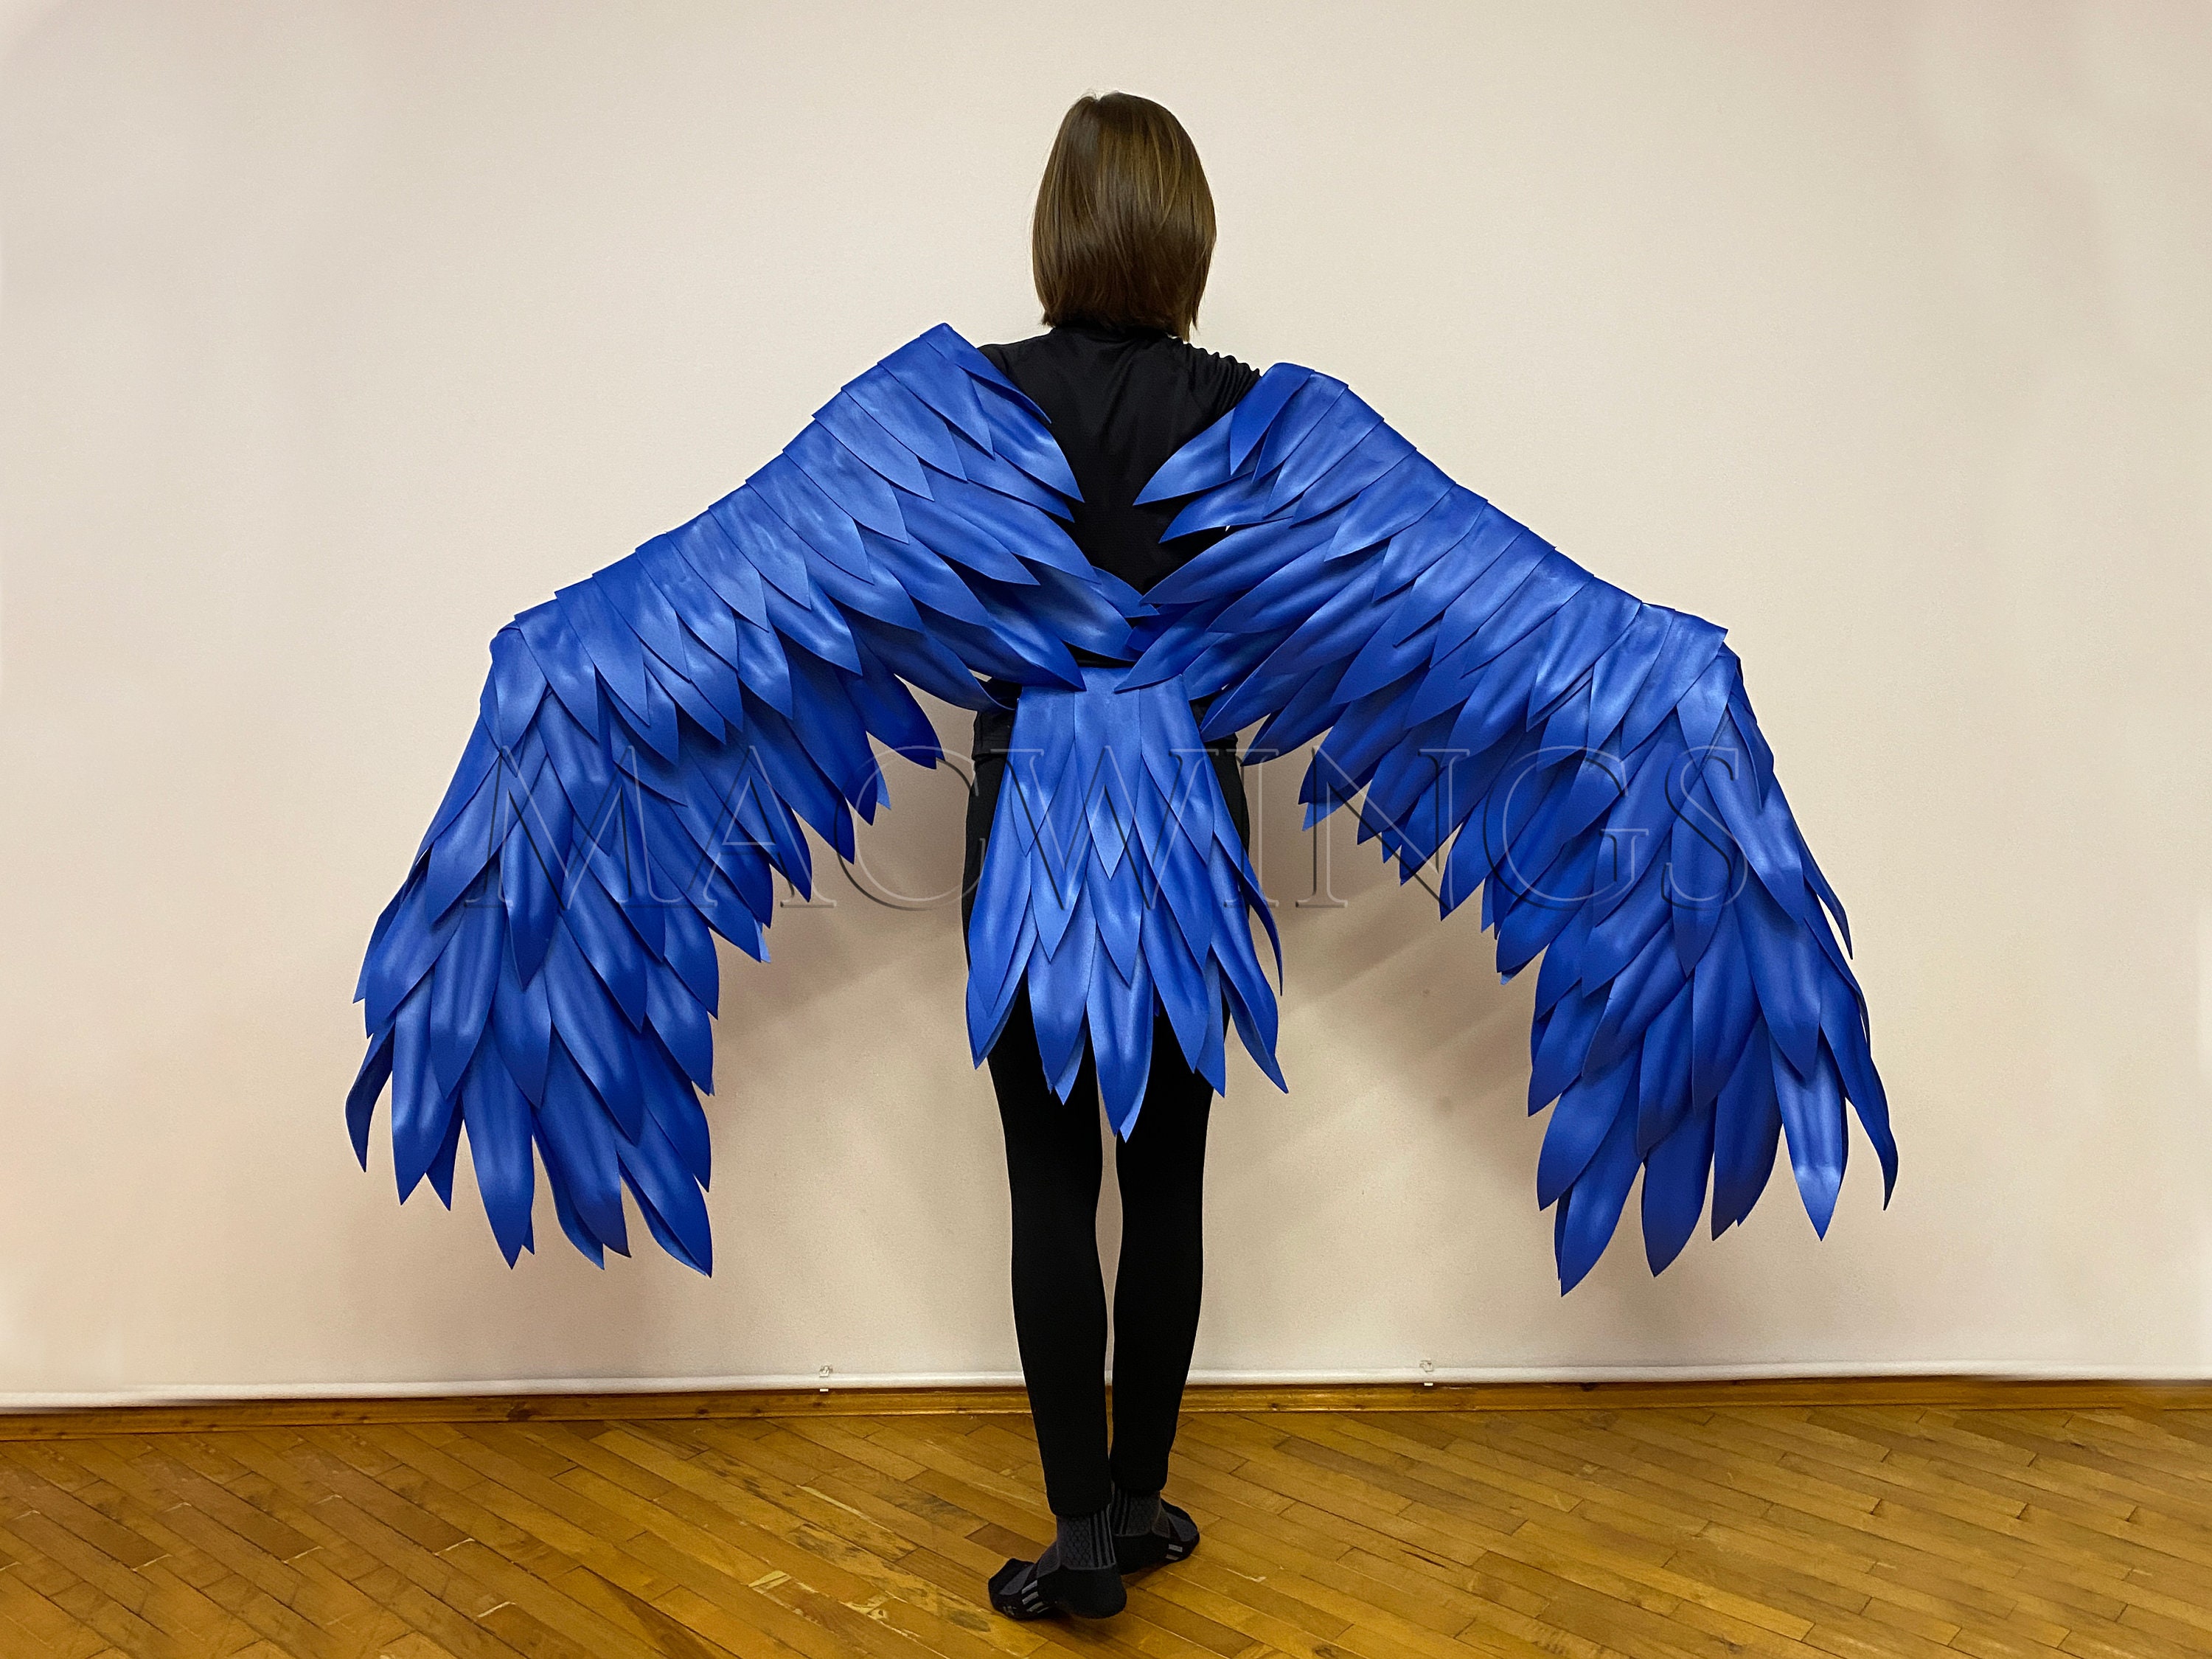 Harpy Wings and Tail, Bird Wings, Arms as Wings, Bird Tail, Bird Costume  Cosplay, Harpy Costume, Wings for Arms, Halloween Costume -  Canada